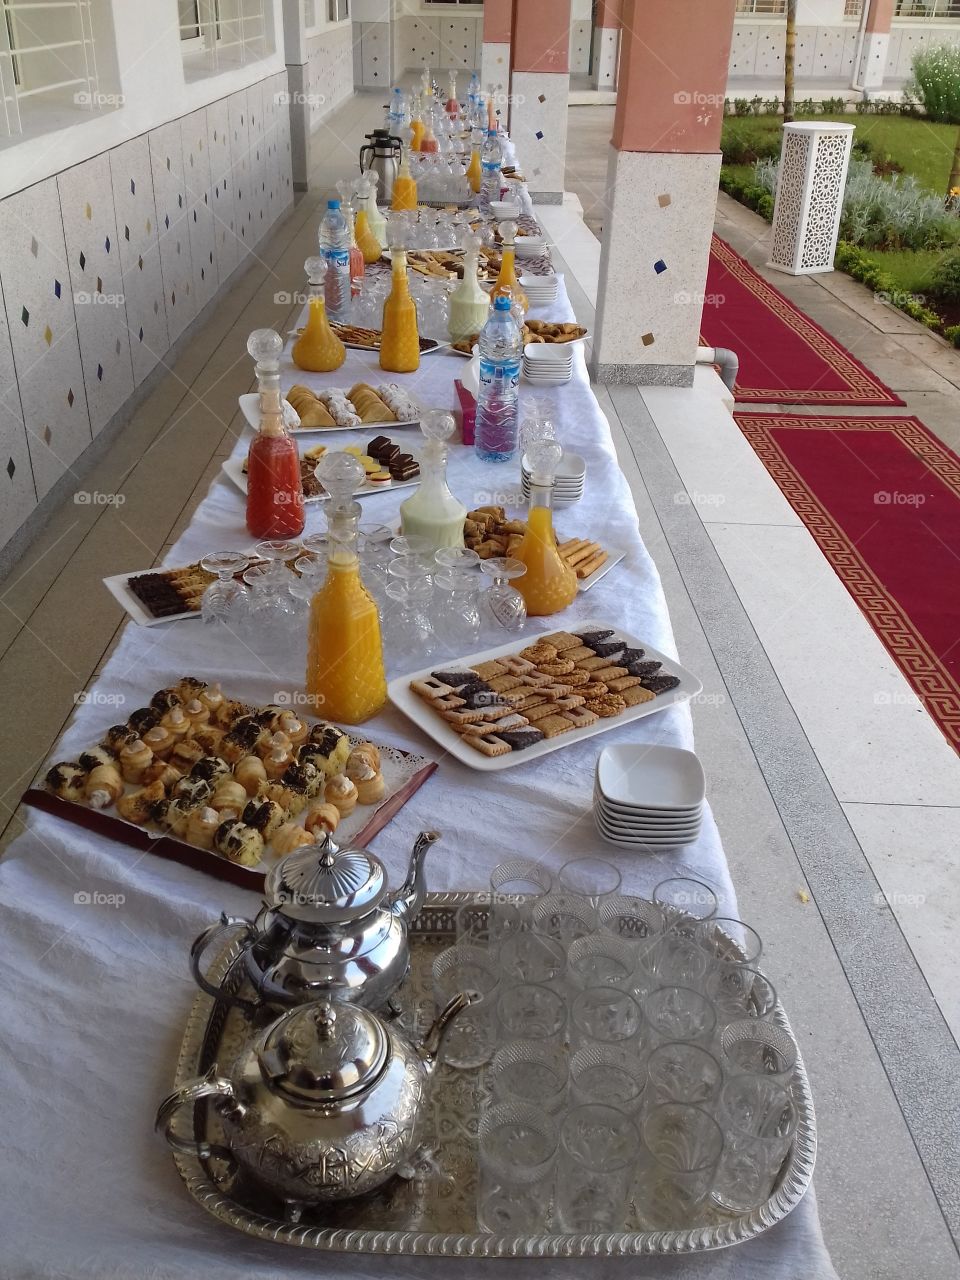 administrative buffet in moroccan faculty